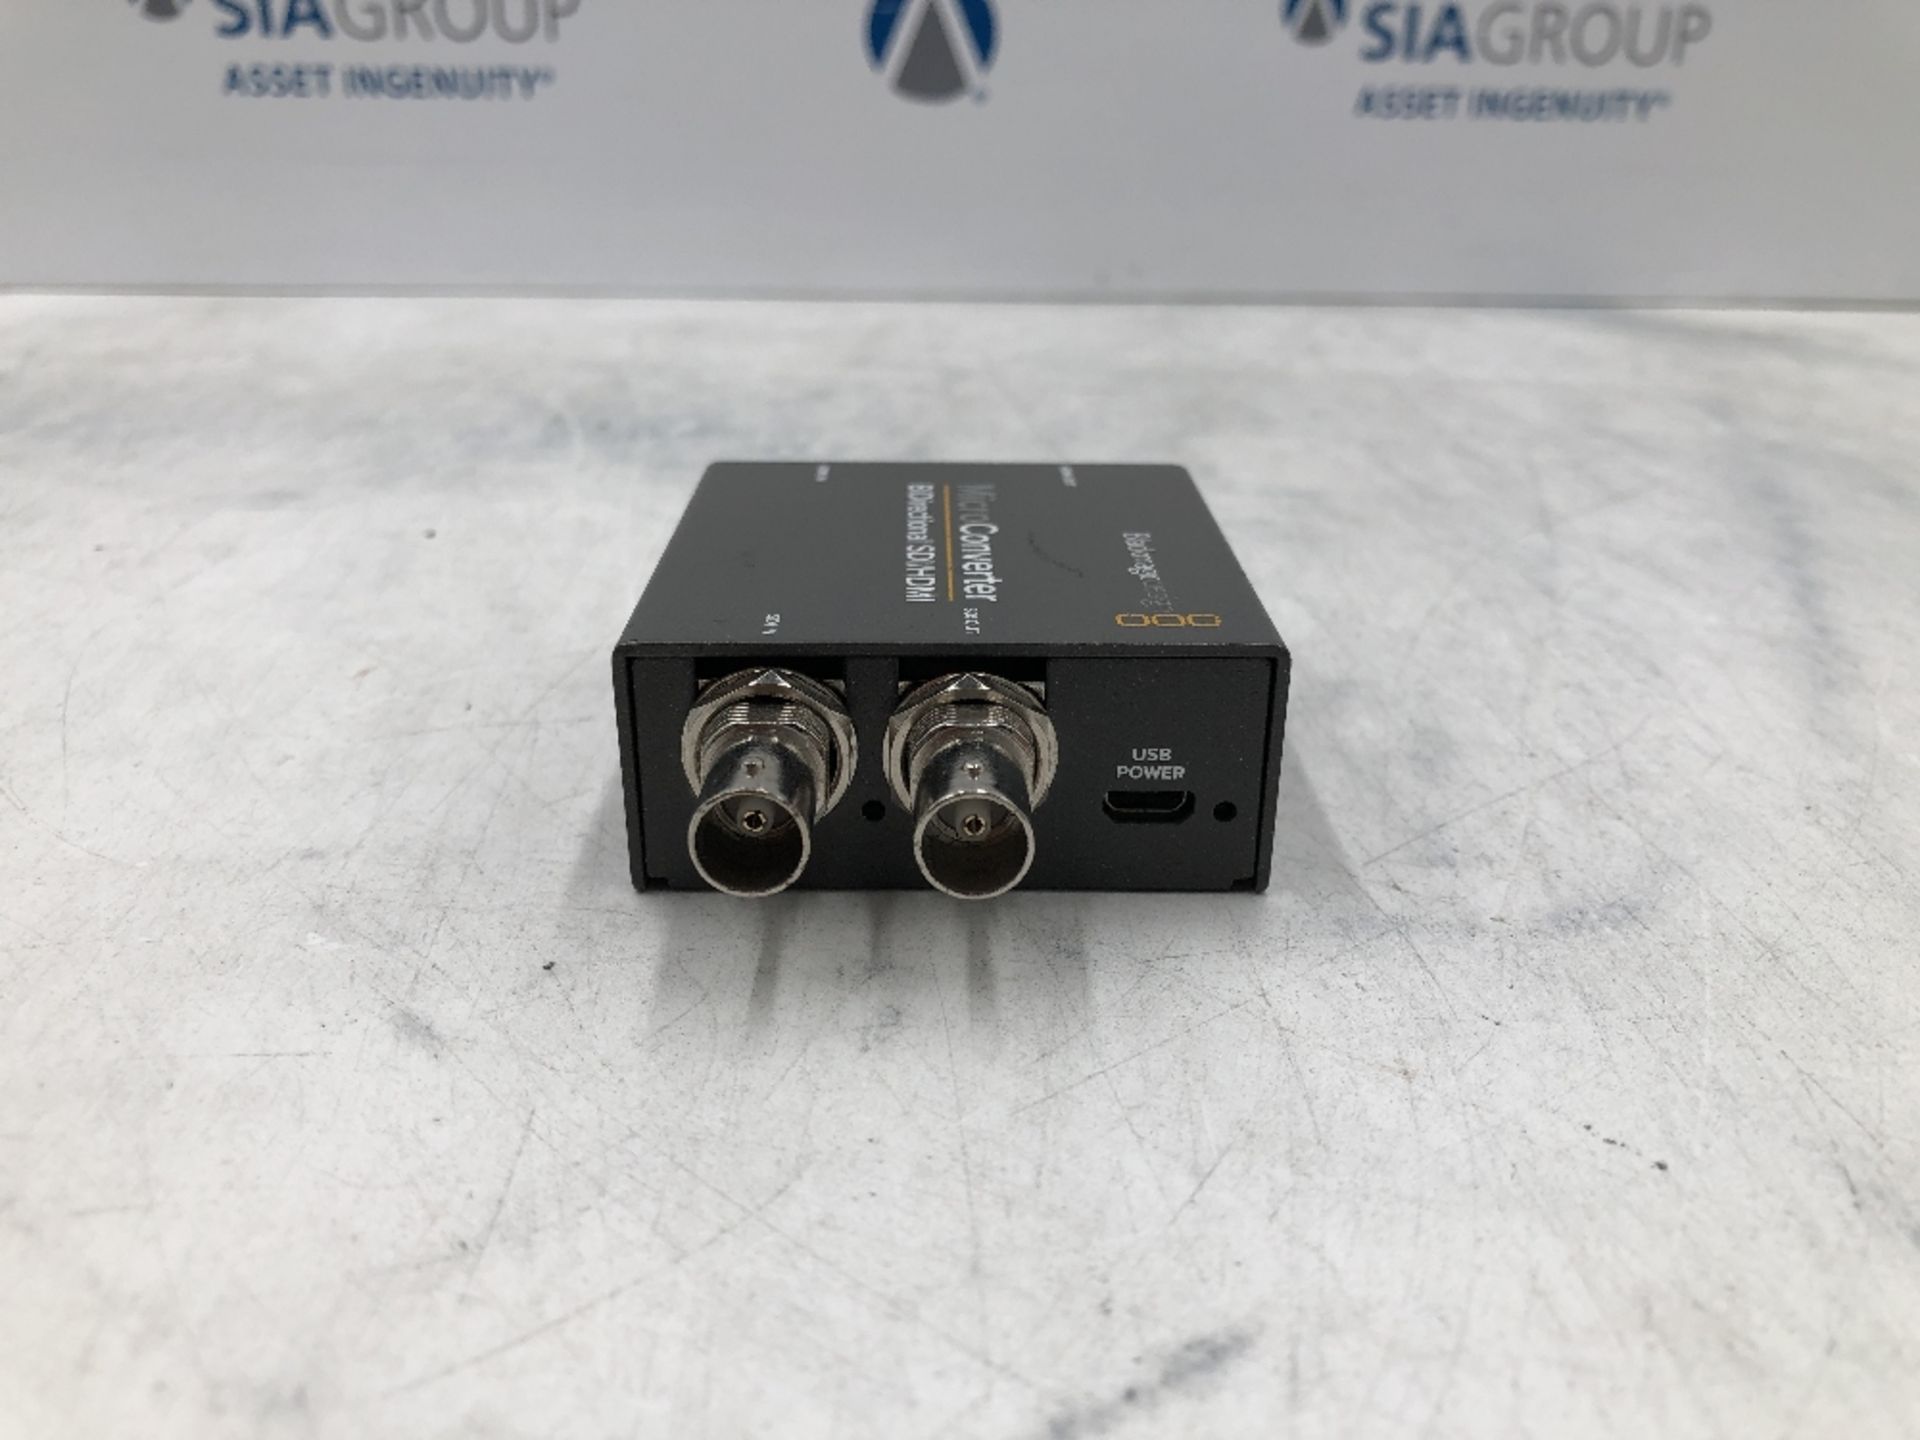 Blackmagic Micro SDI to HDMI Bi-Directional Converter With Power Cable And Plastic Carry Case - Image 3 of 6